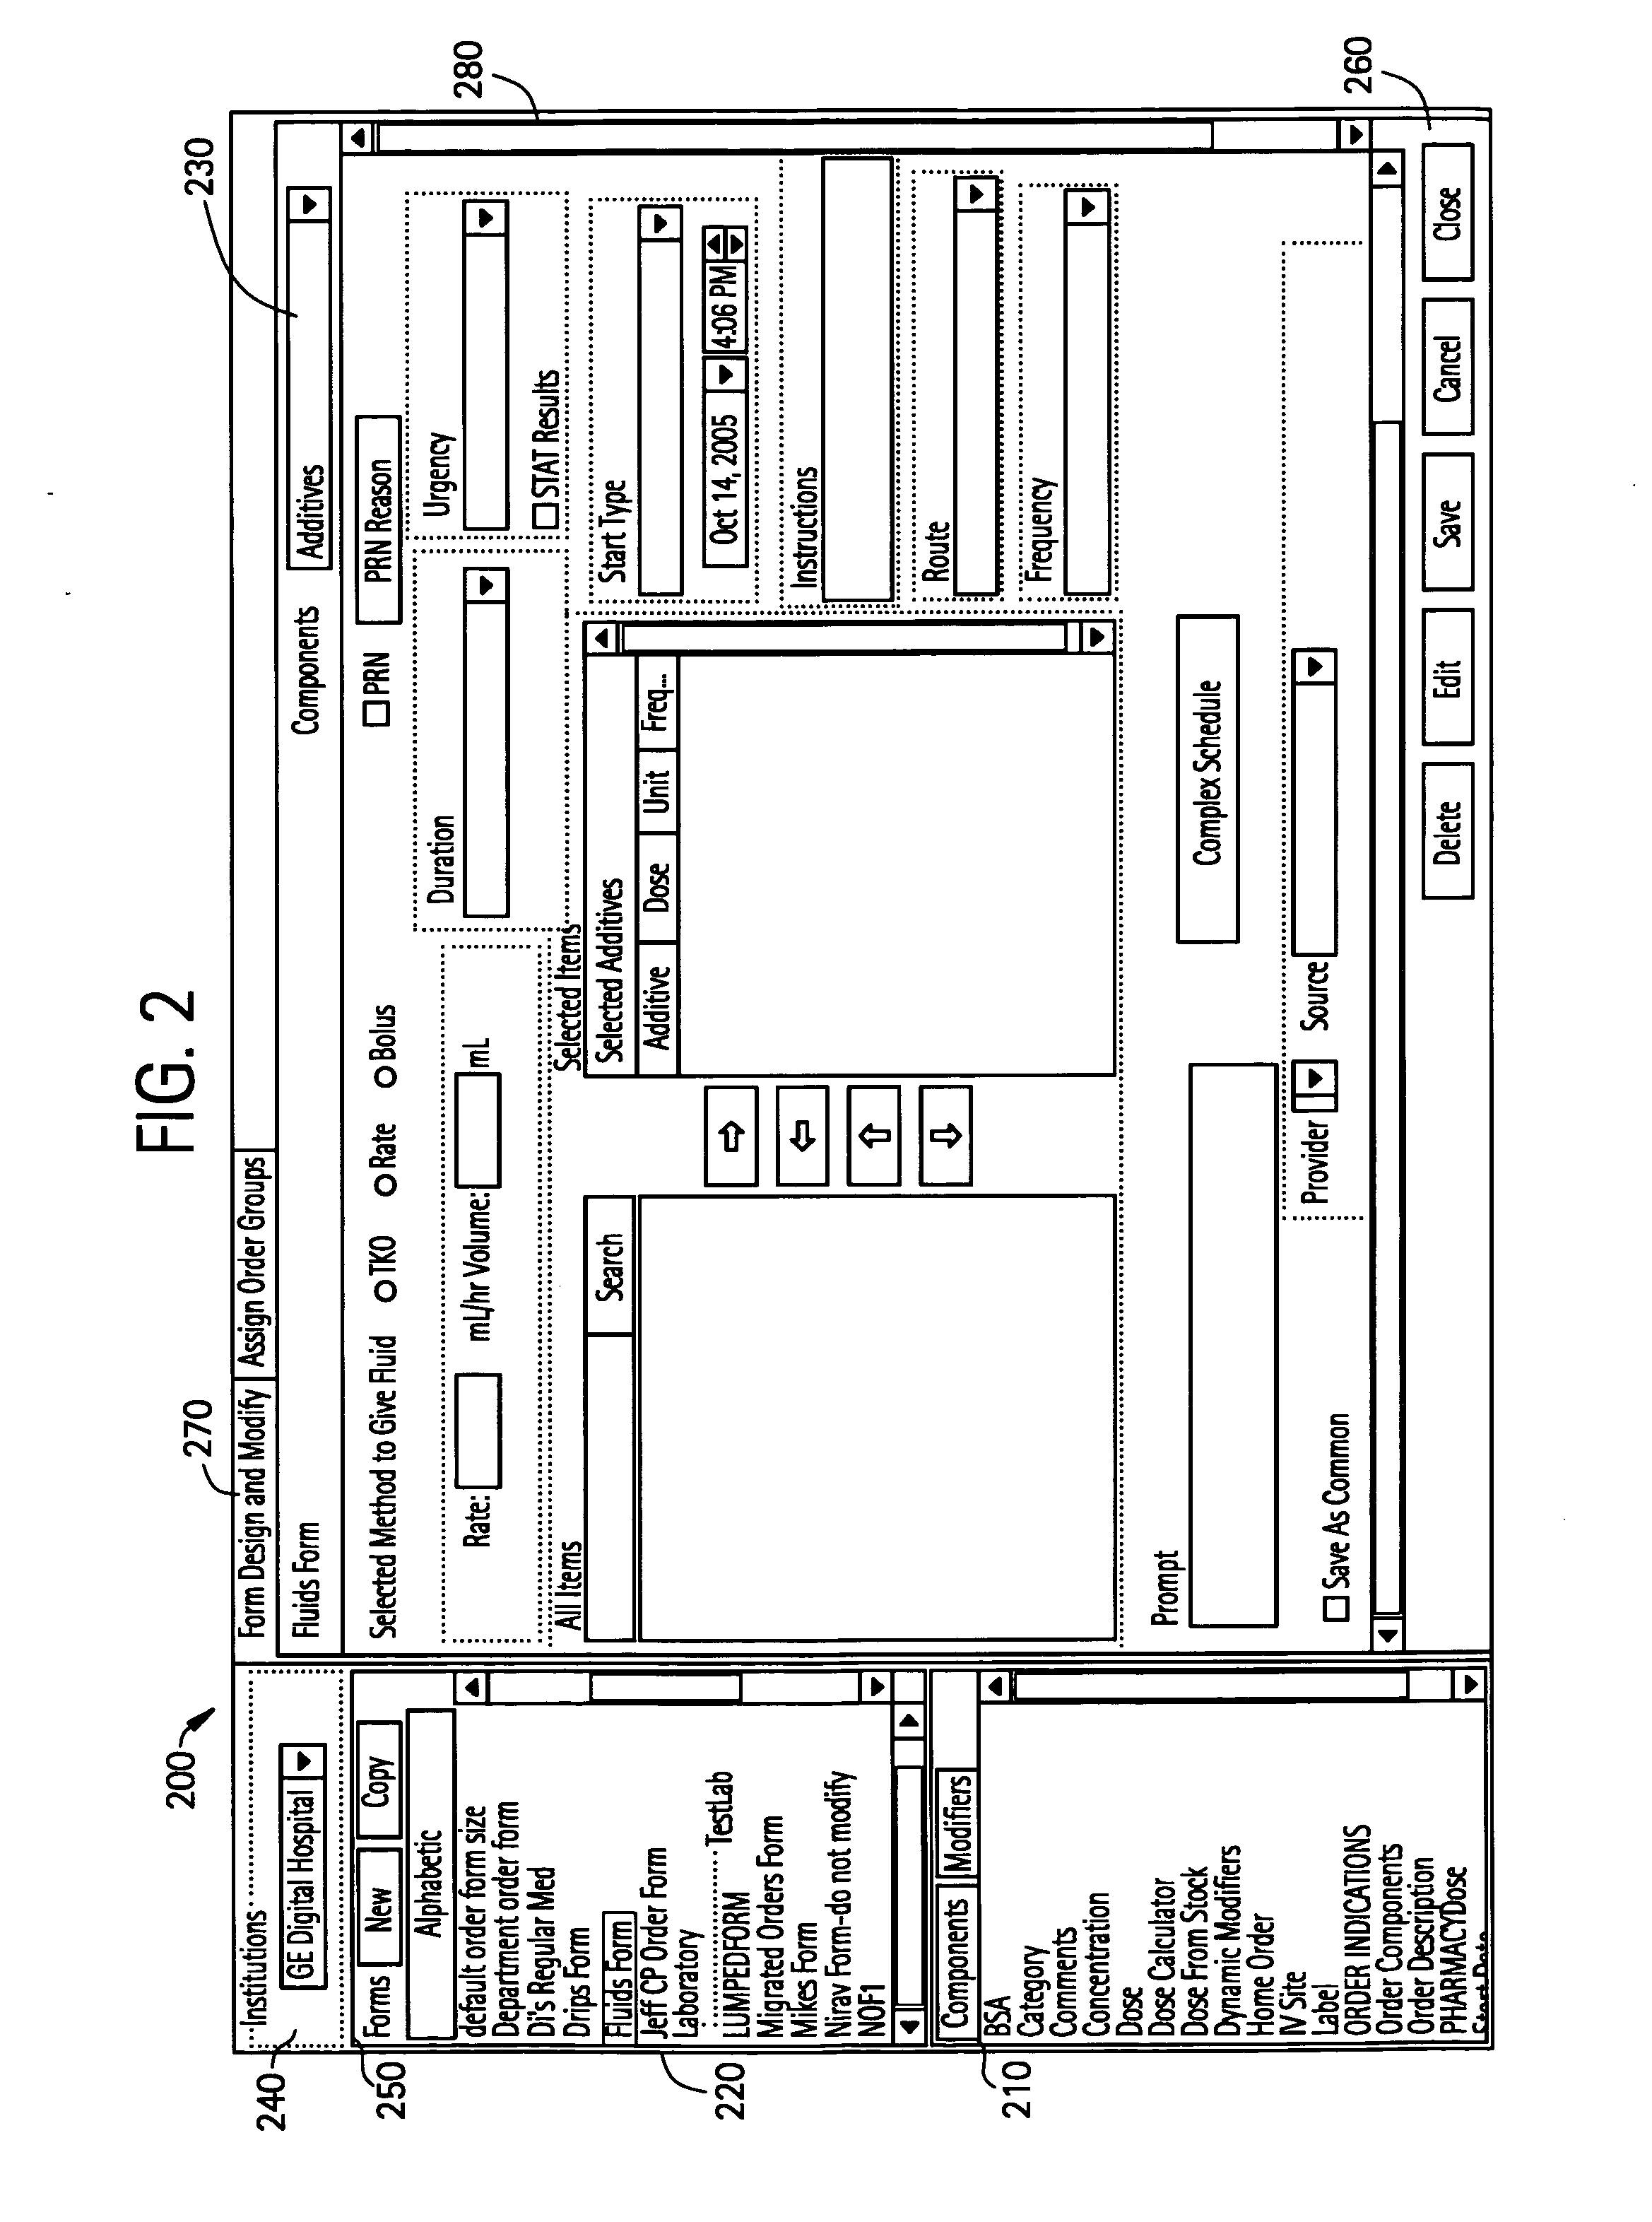 Configurable system and method for order entry